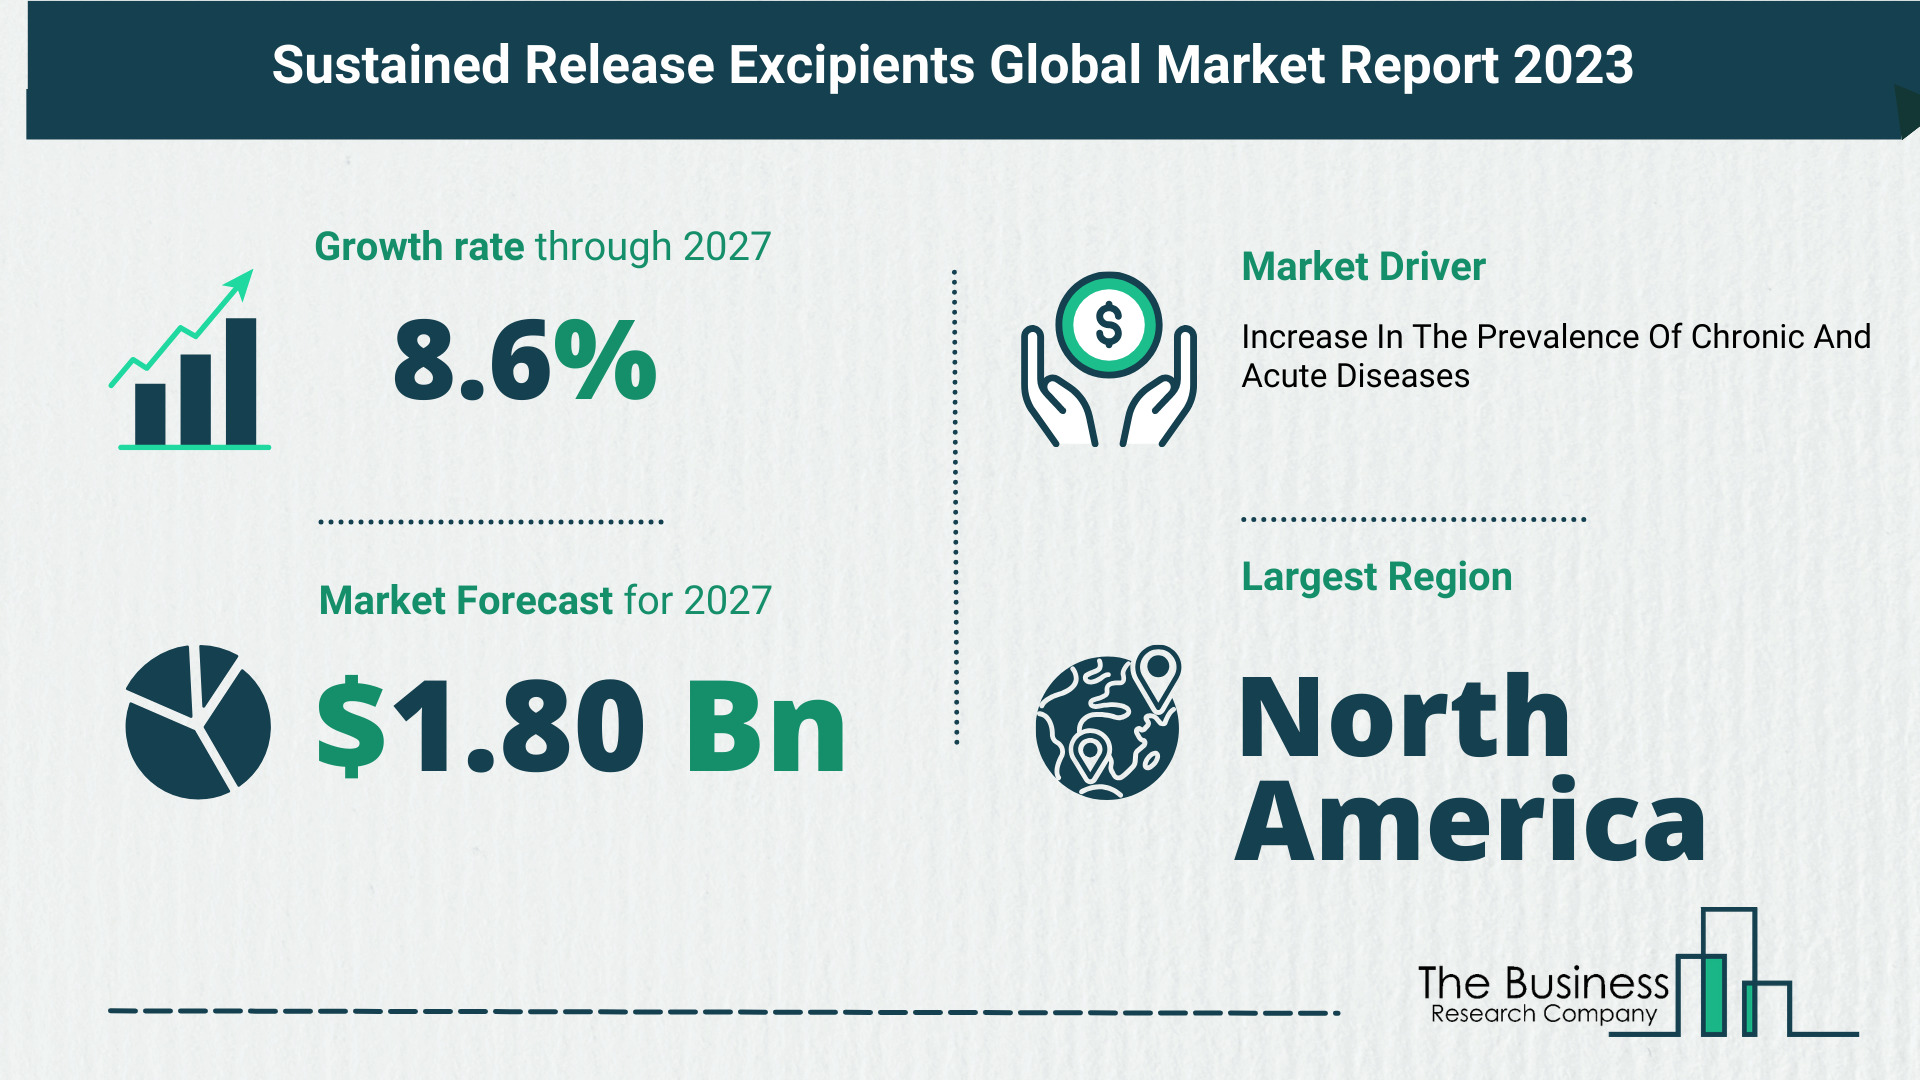 Global Sustained Release Excipients Market